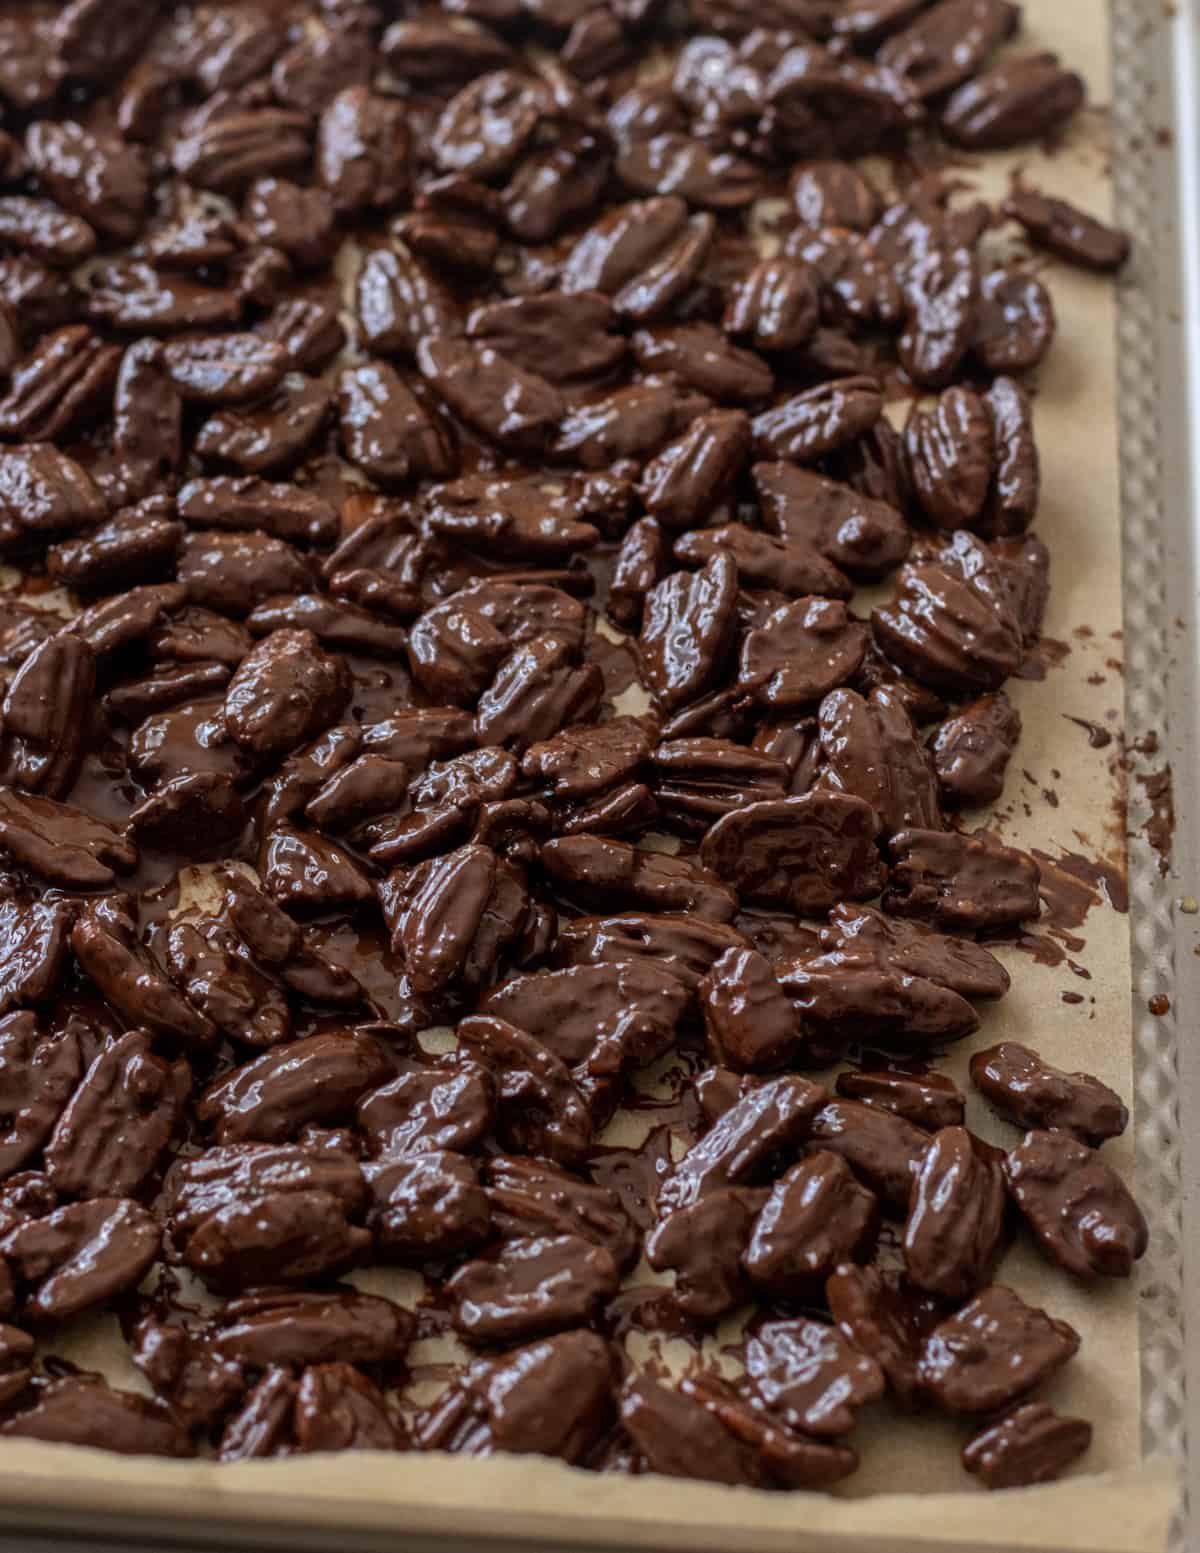 Chocolate covered pecans on a parchment lined baking sheet.